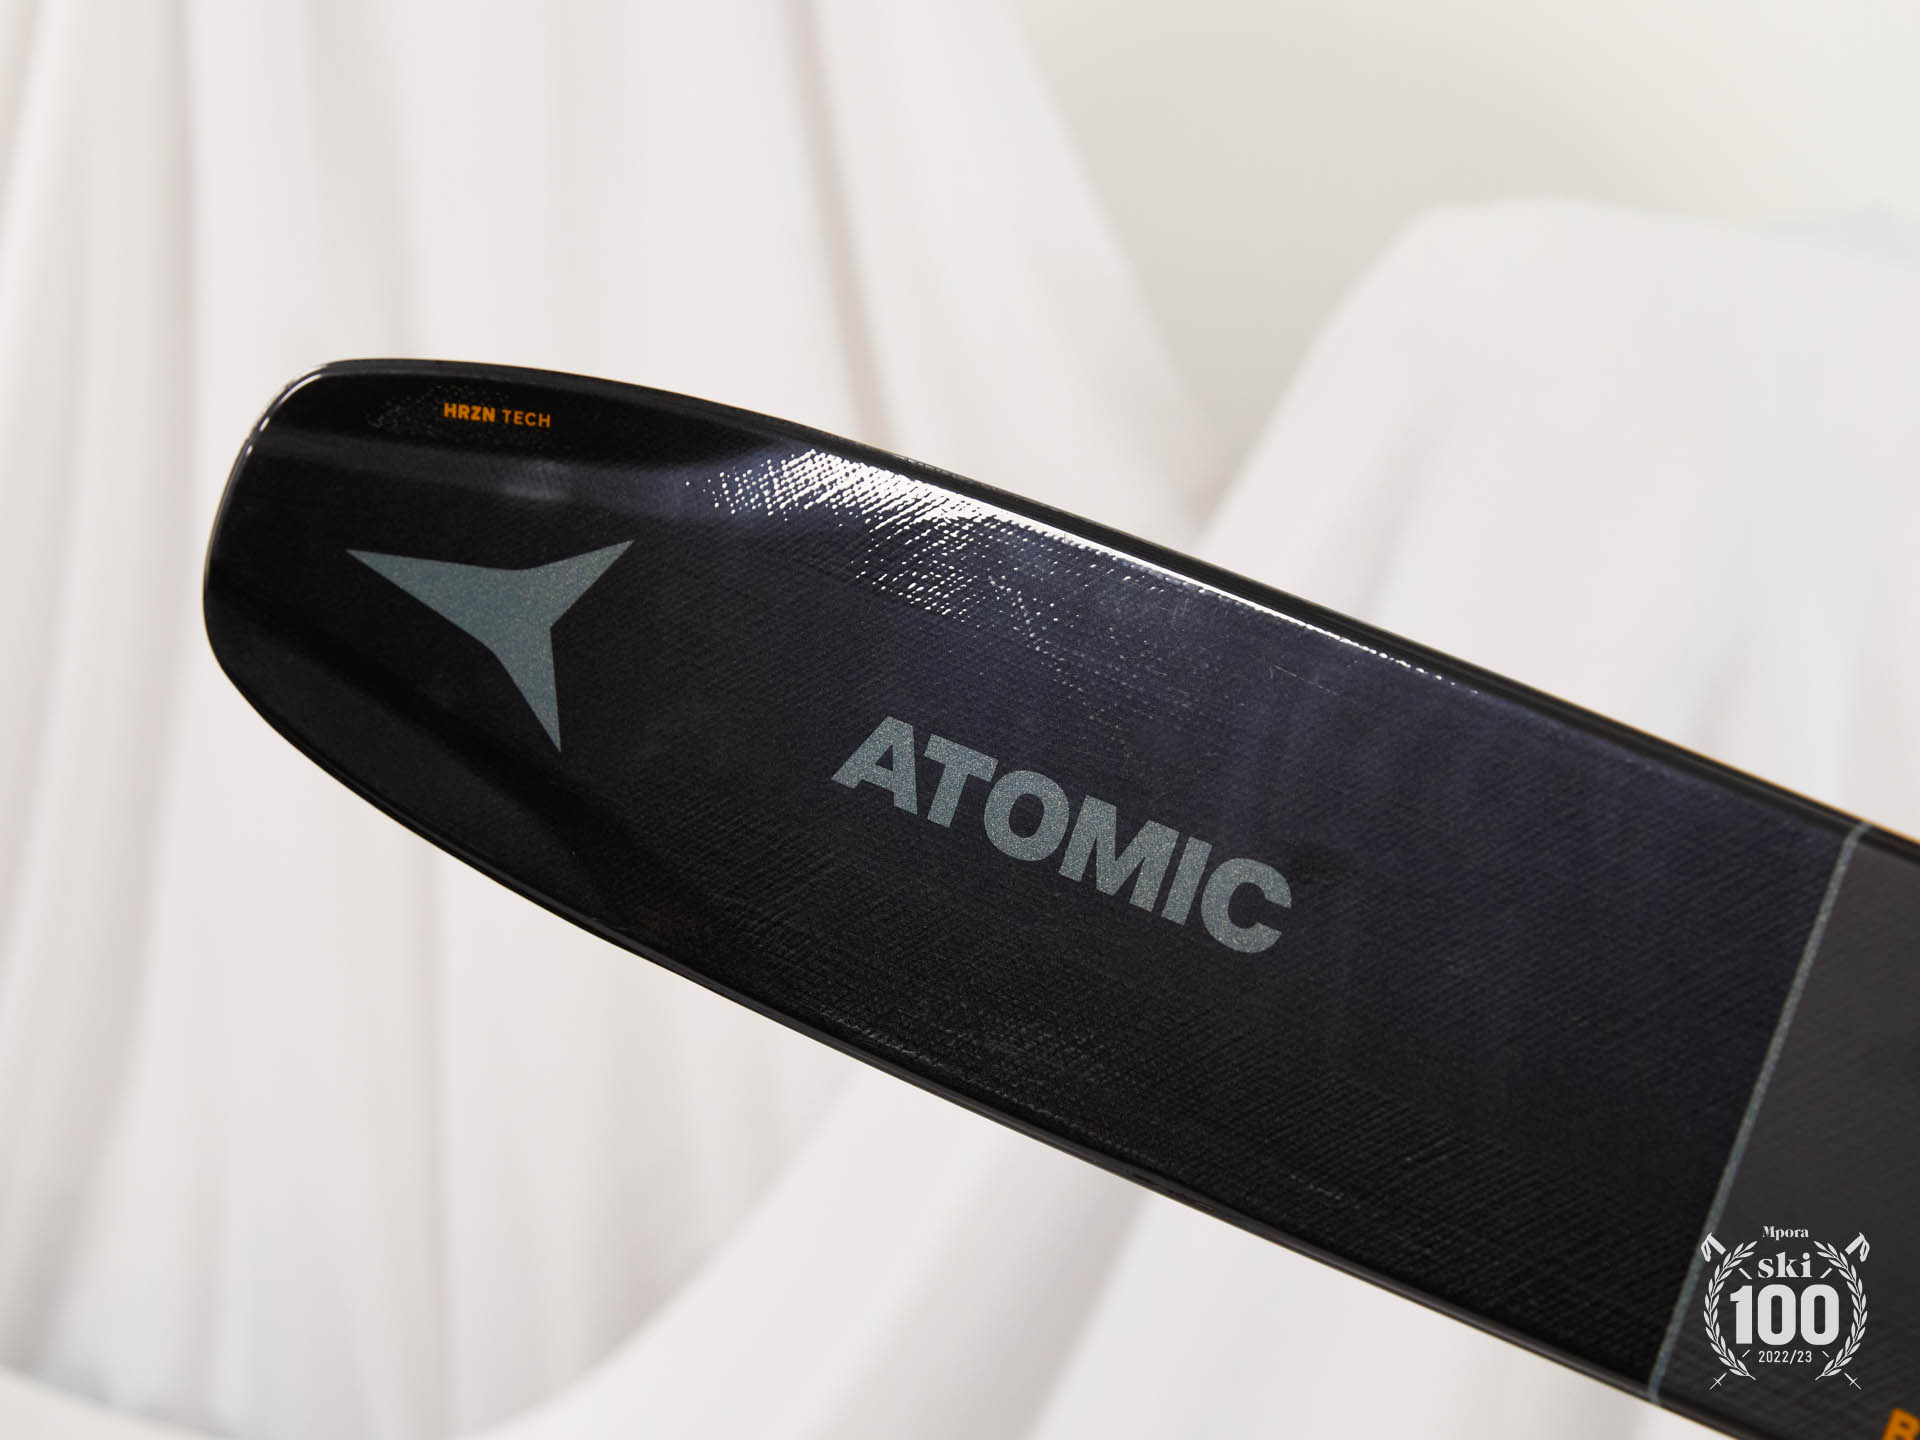 Atomic Backland 107 | Review